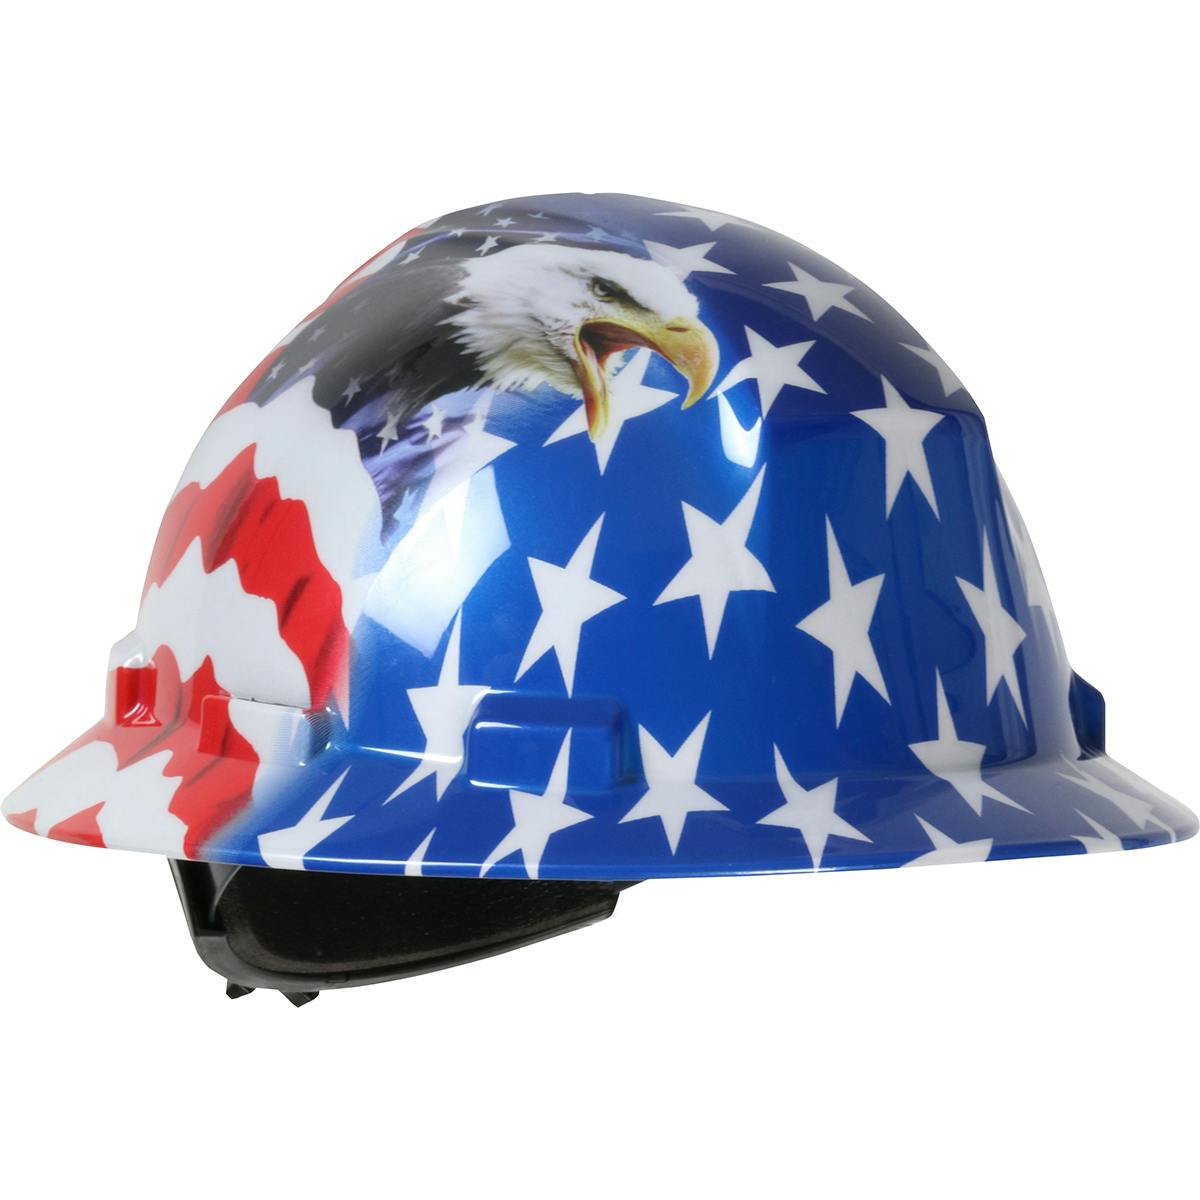 Full Brim Hard Hat with HDPE Shell, 4-Point Textile Suspension Graphic Wrap and Wheel Ratchet Adjustment, Navy (280-HP641R-USA) - OS_2